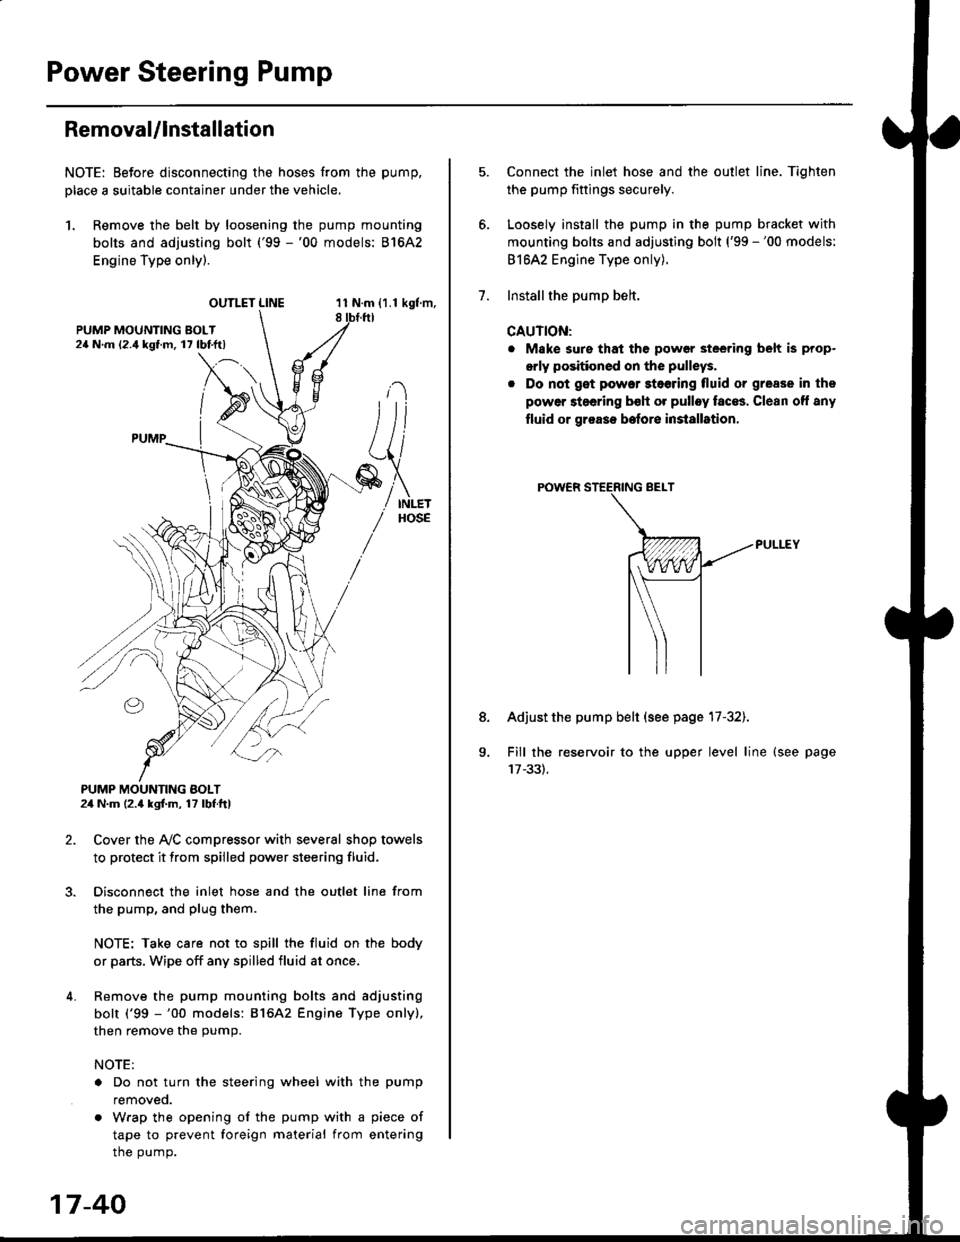 HONDA CIVIC 1997 6.G Owners Manual Power Steering Pump
RemovaUlnstallation
NOTE: Eefore disconnecting the hoses from the pump,
Dlace a suitable container under the vehicle.
1. Remove the belt by loosening the pump mounting
bolts and ad